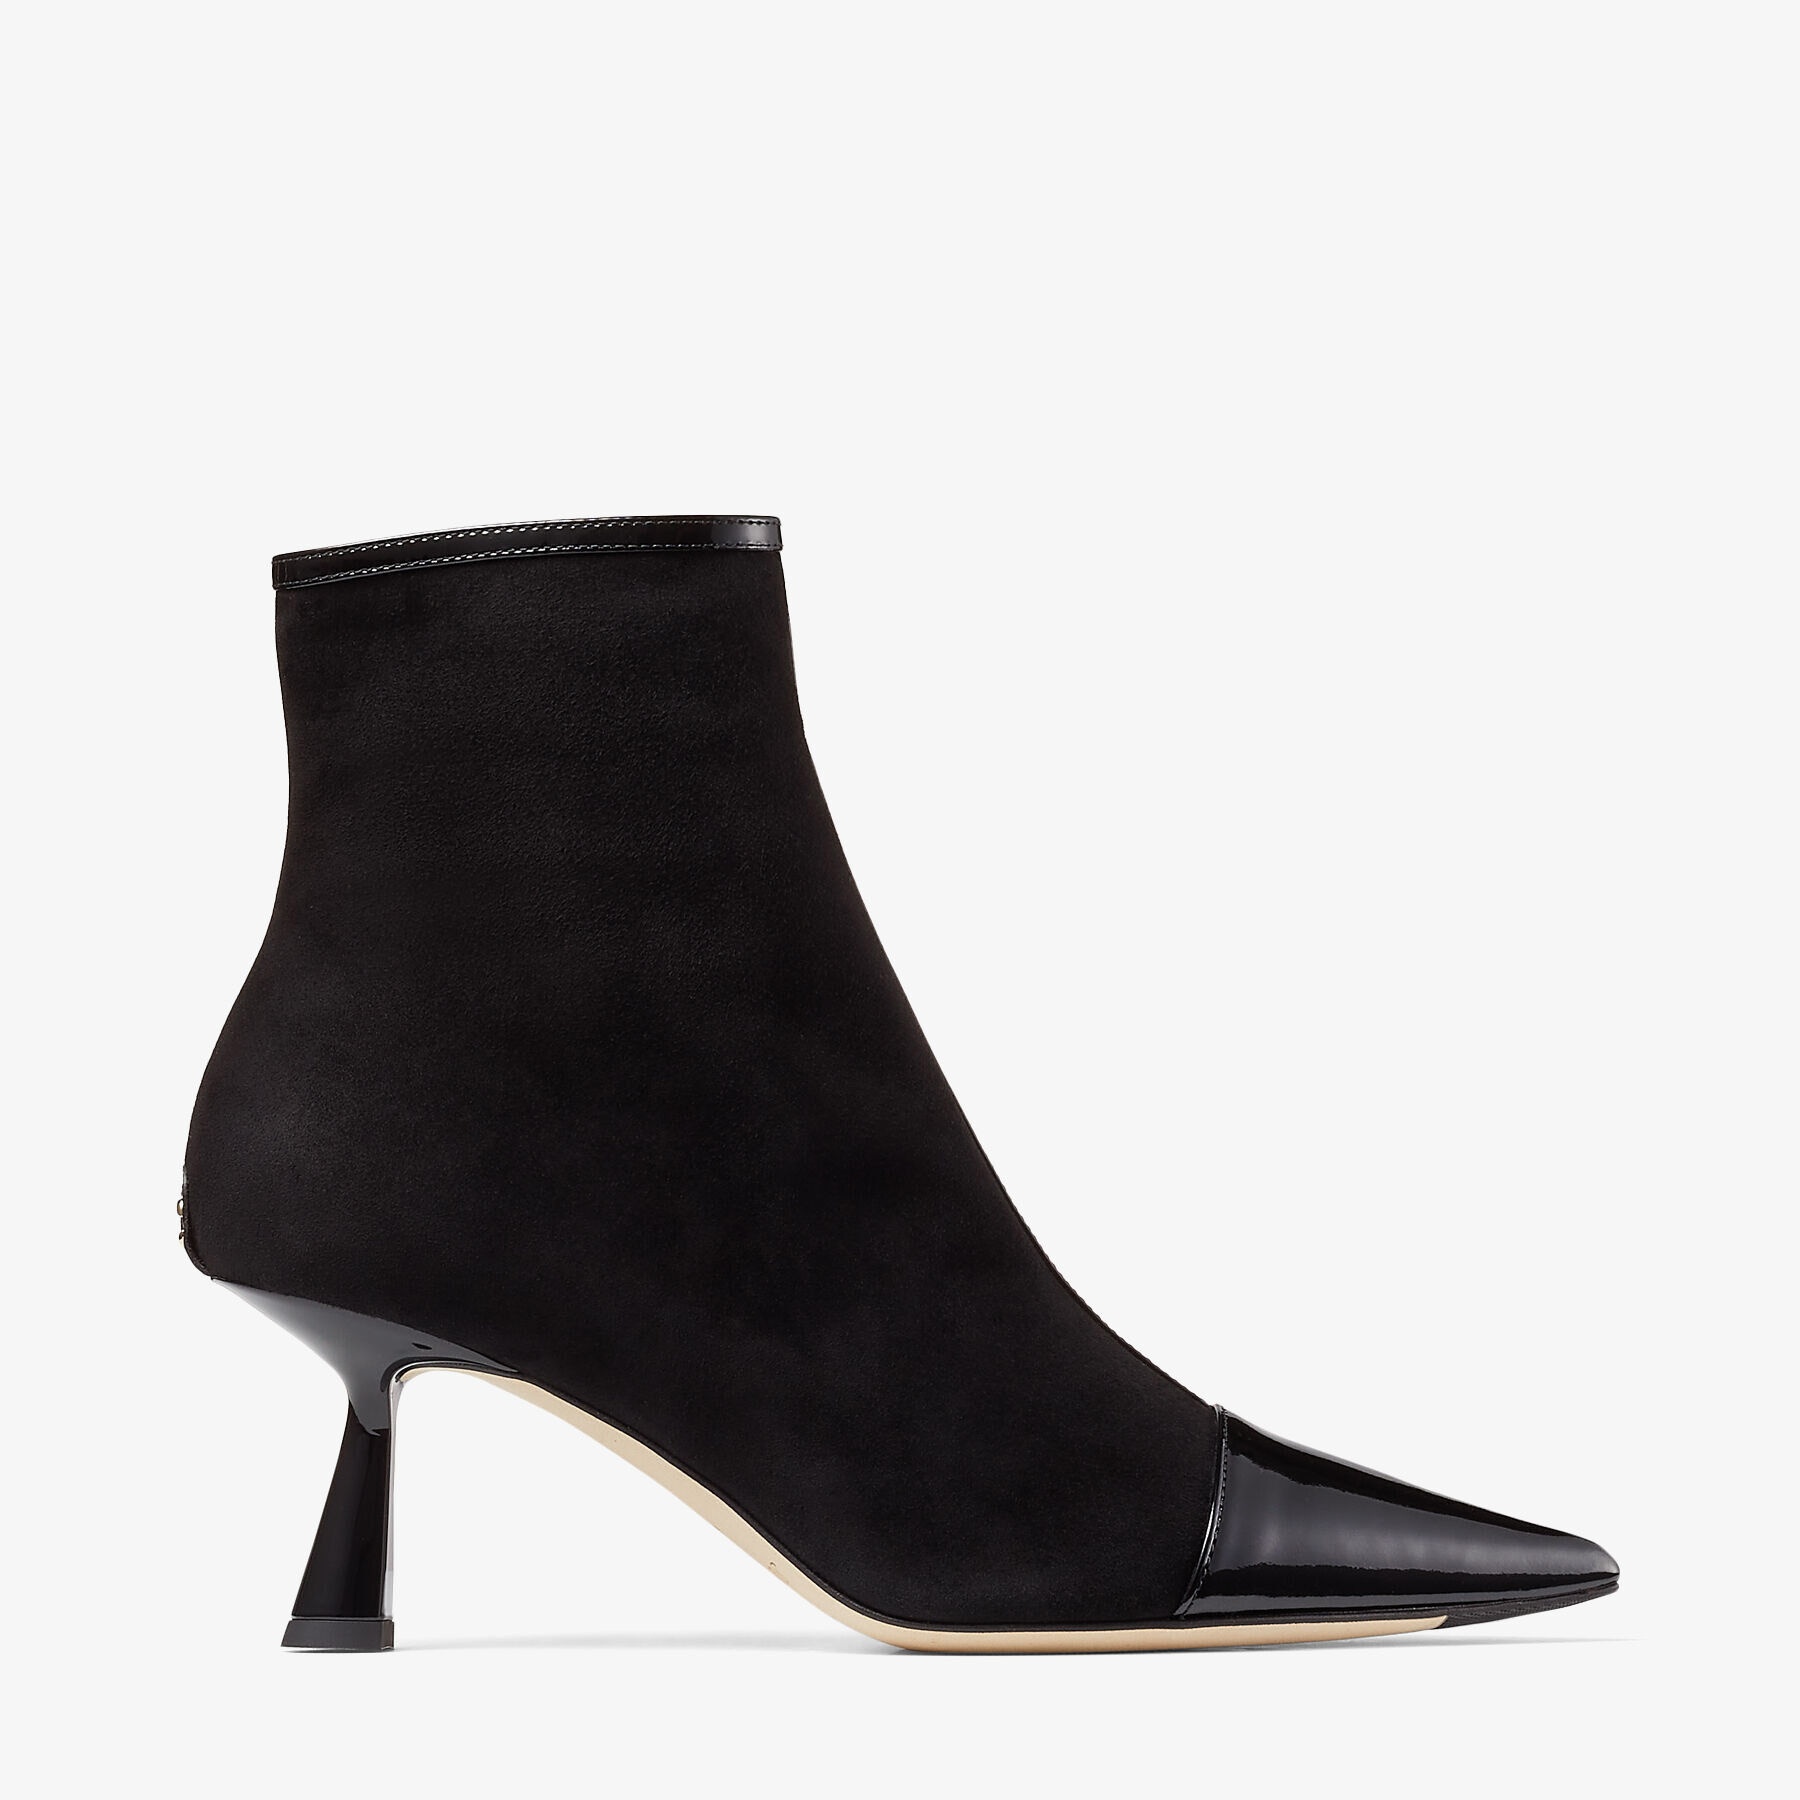 Kix/z 65
Black Patent and Suede Ankle Boots - 1